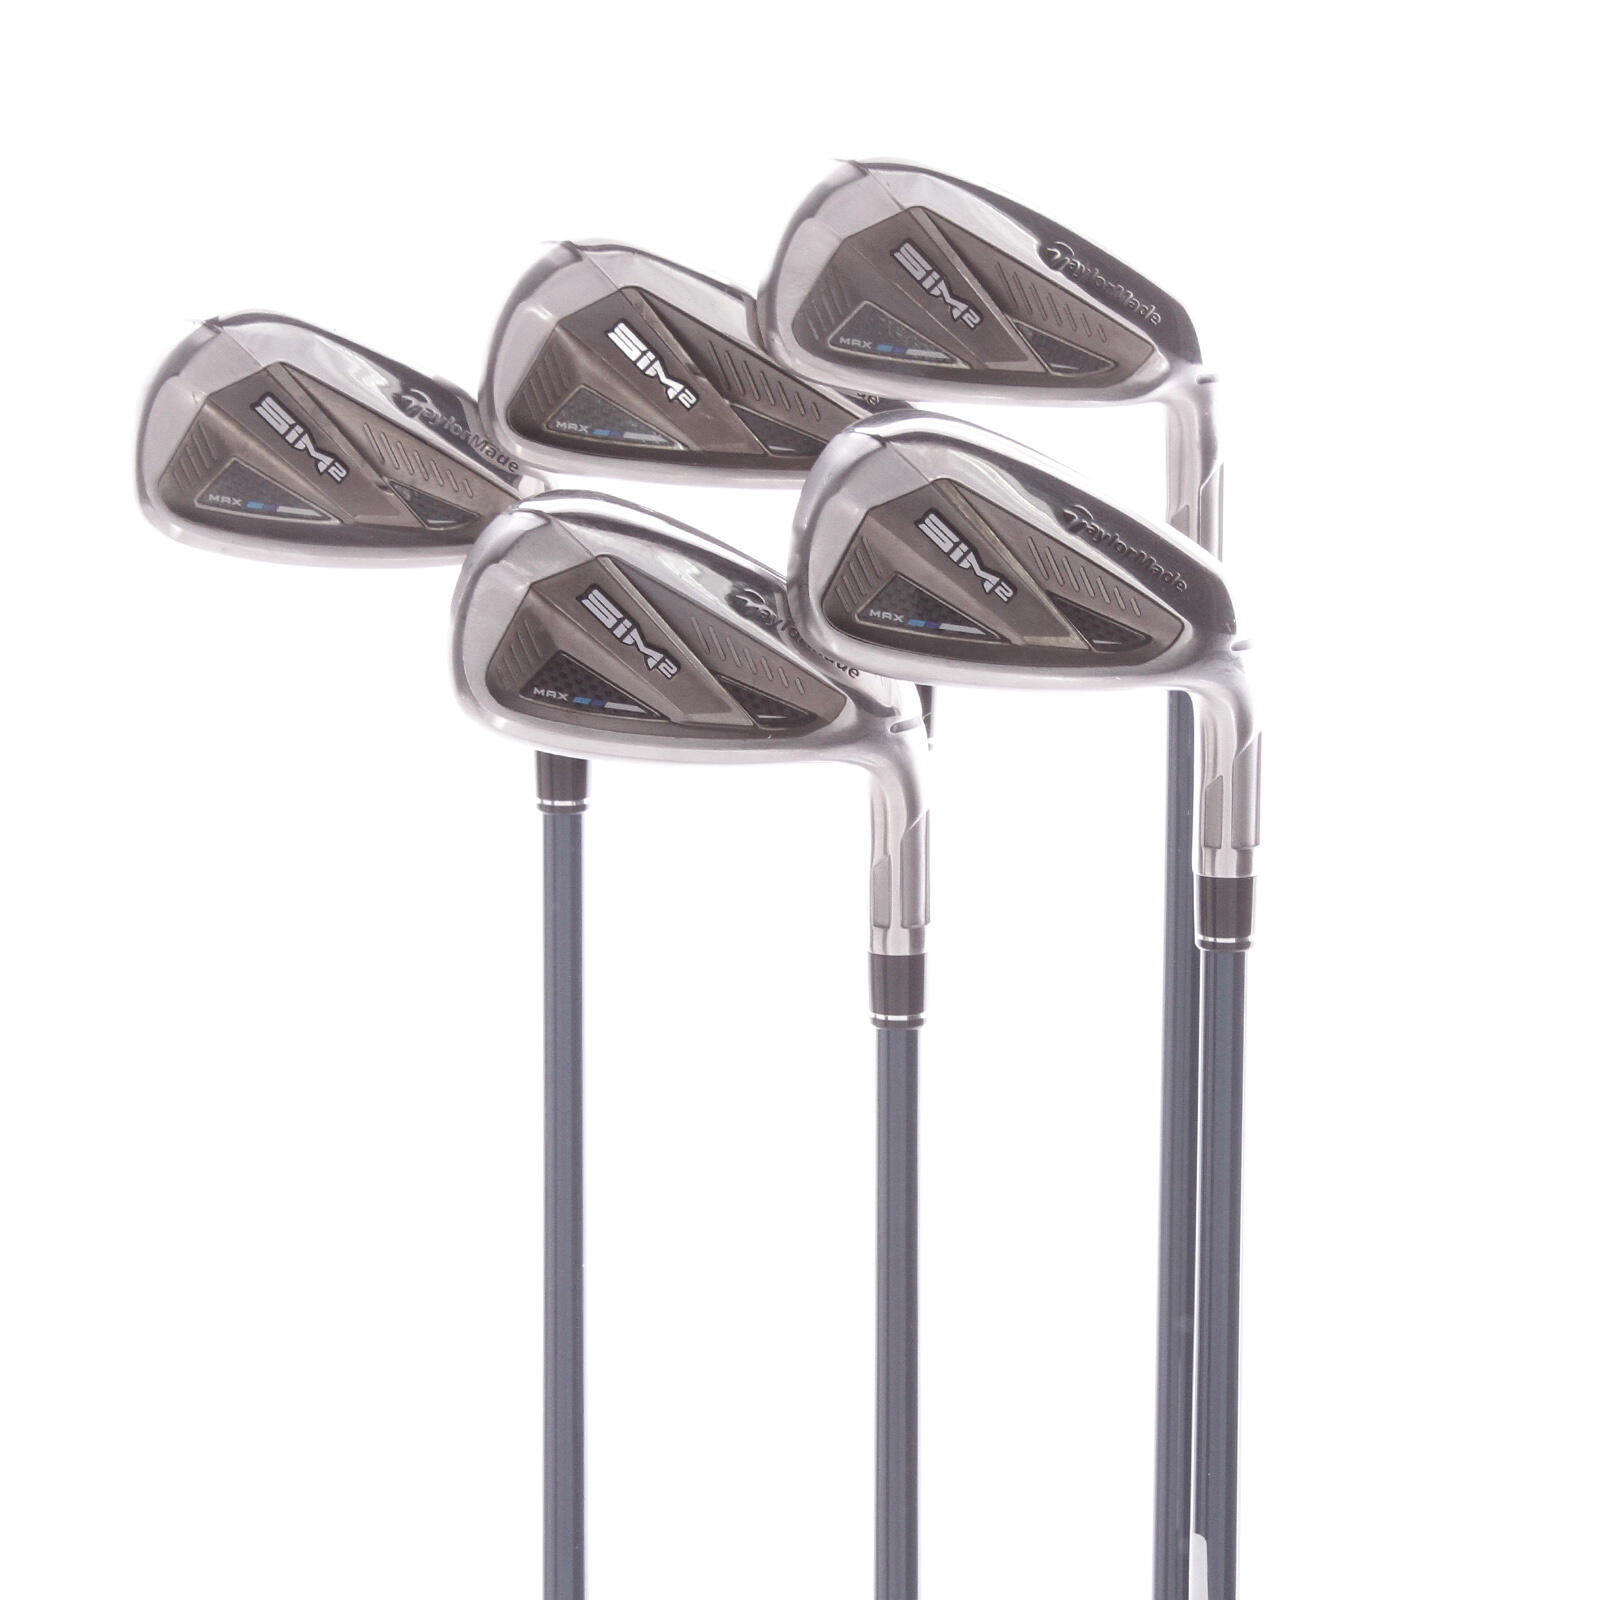 TAYLORMADE USED - Iron Set 6-PW TaylorMade Sim2 Max Graphite Shaft Right Handed - GRADE B